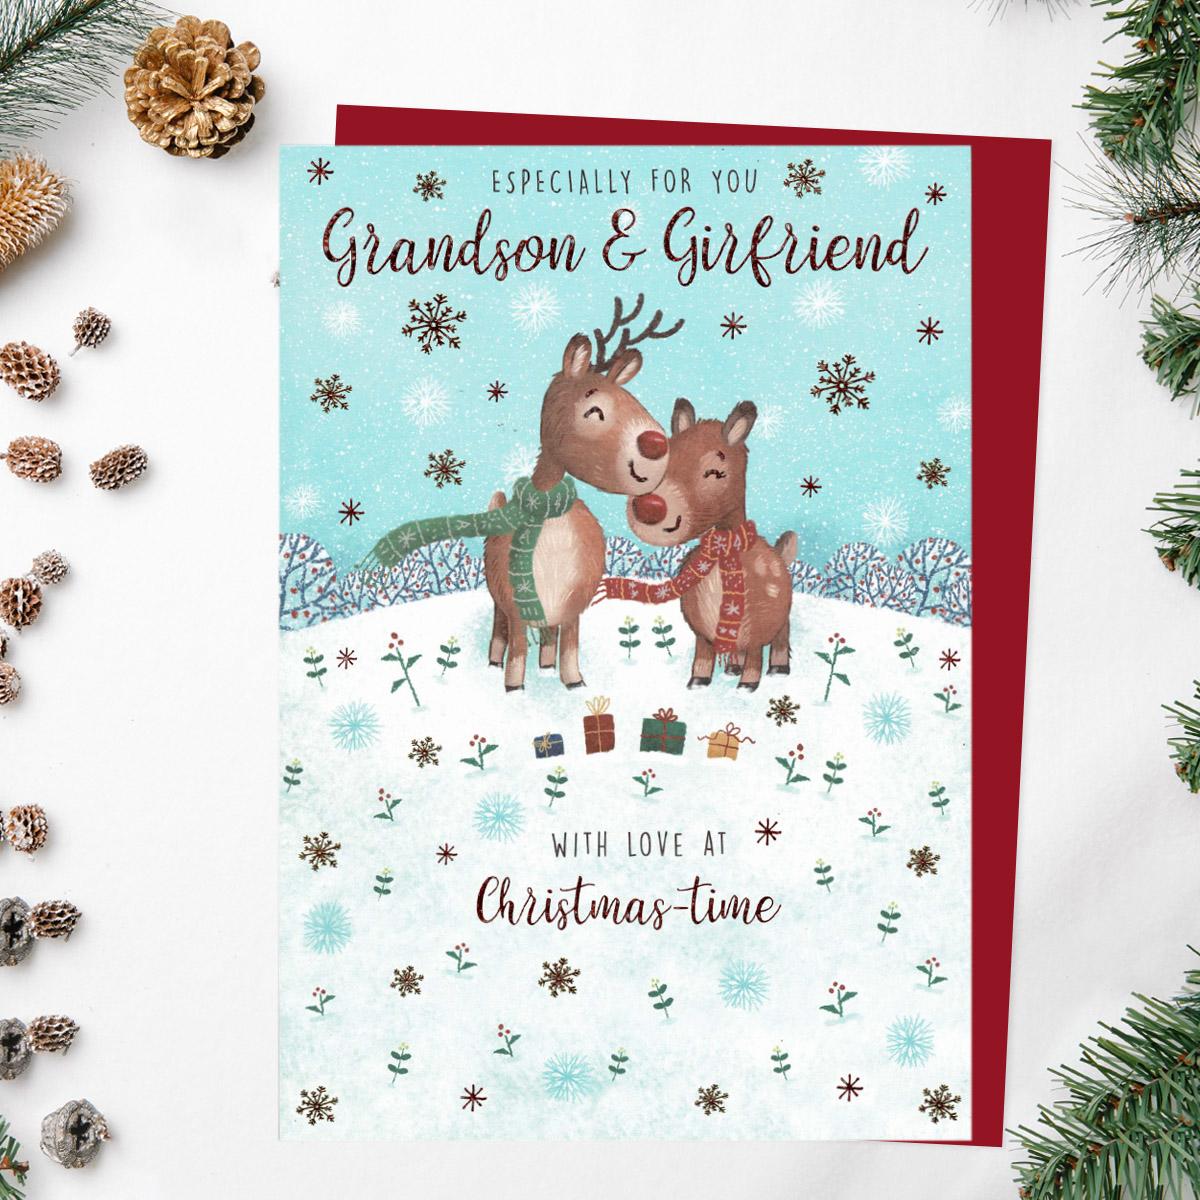 Grandson & Girlfriend Christmas Card Front Image